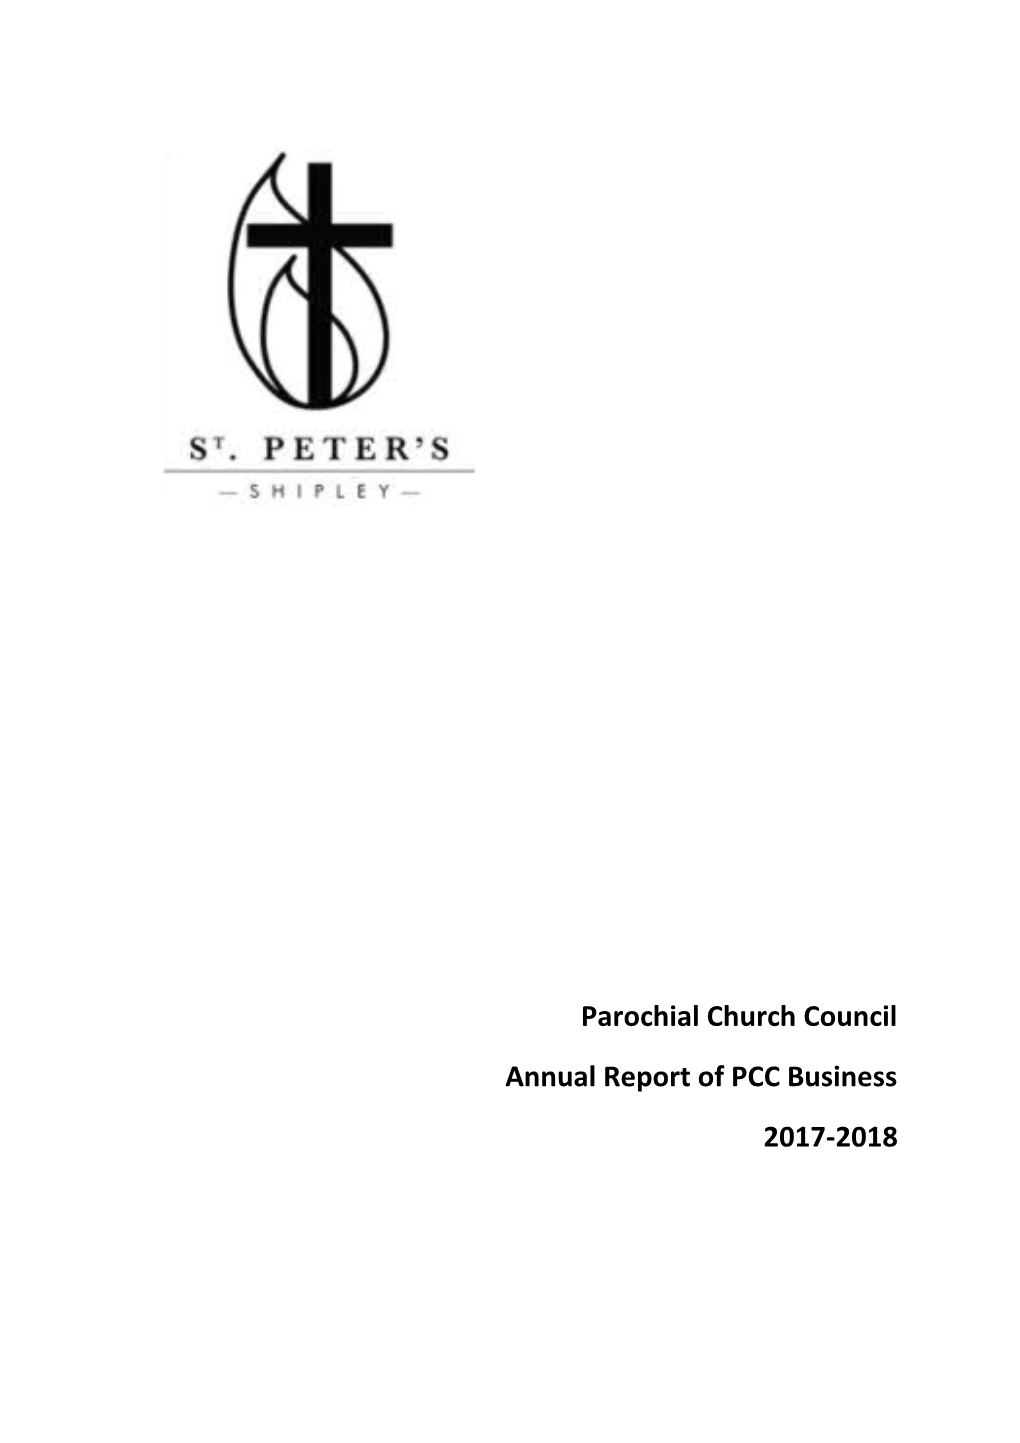 Annual Report of PCC Business